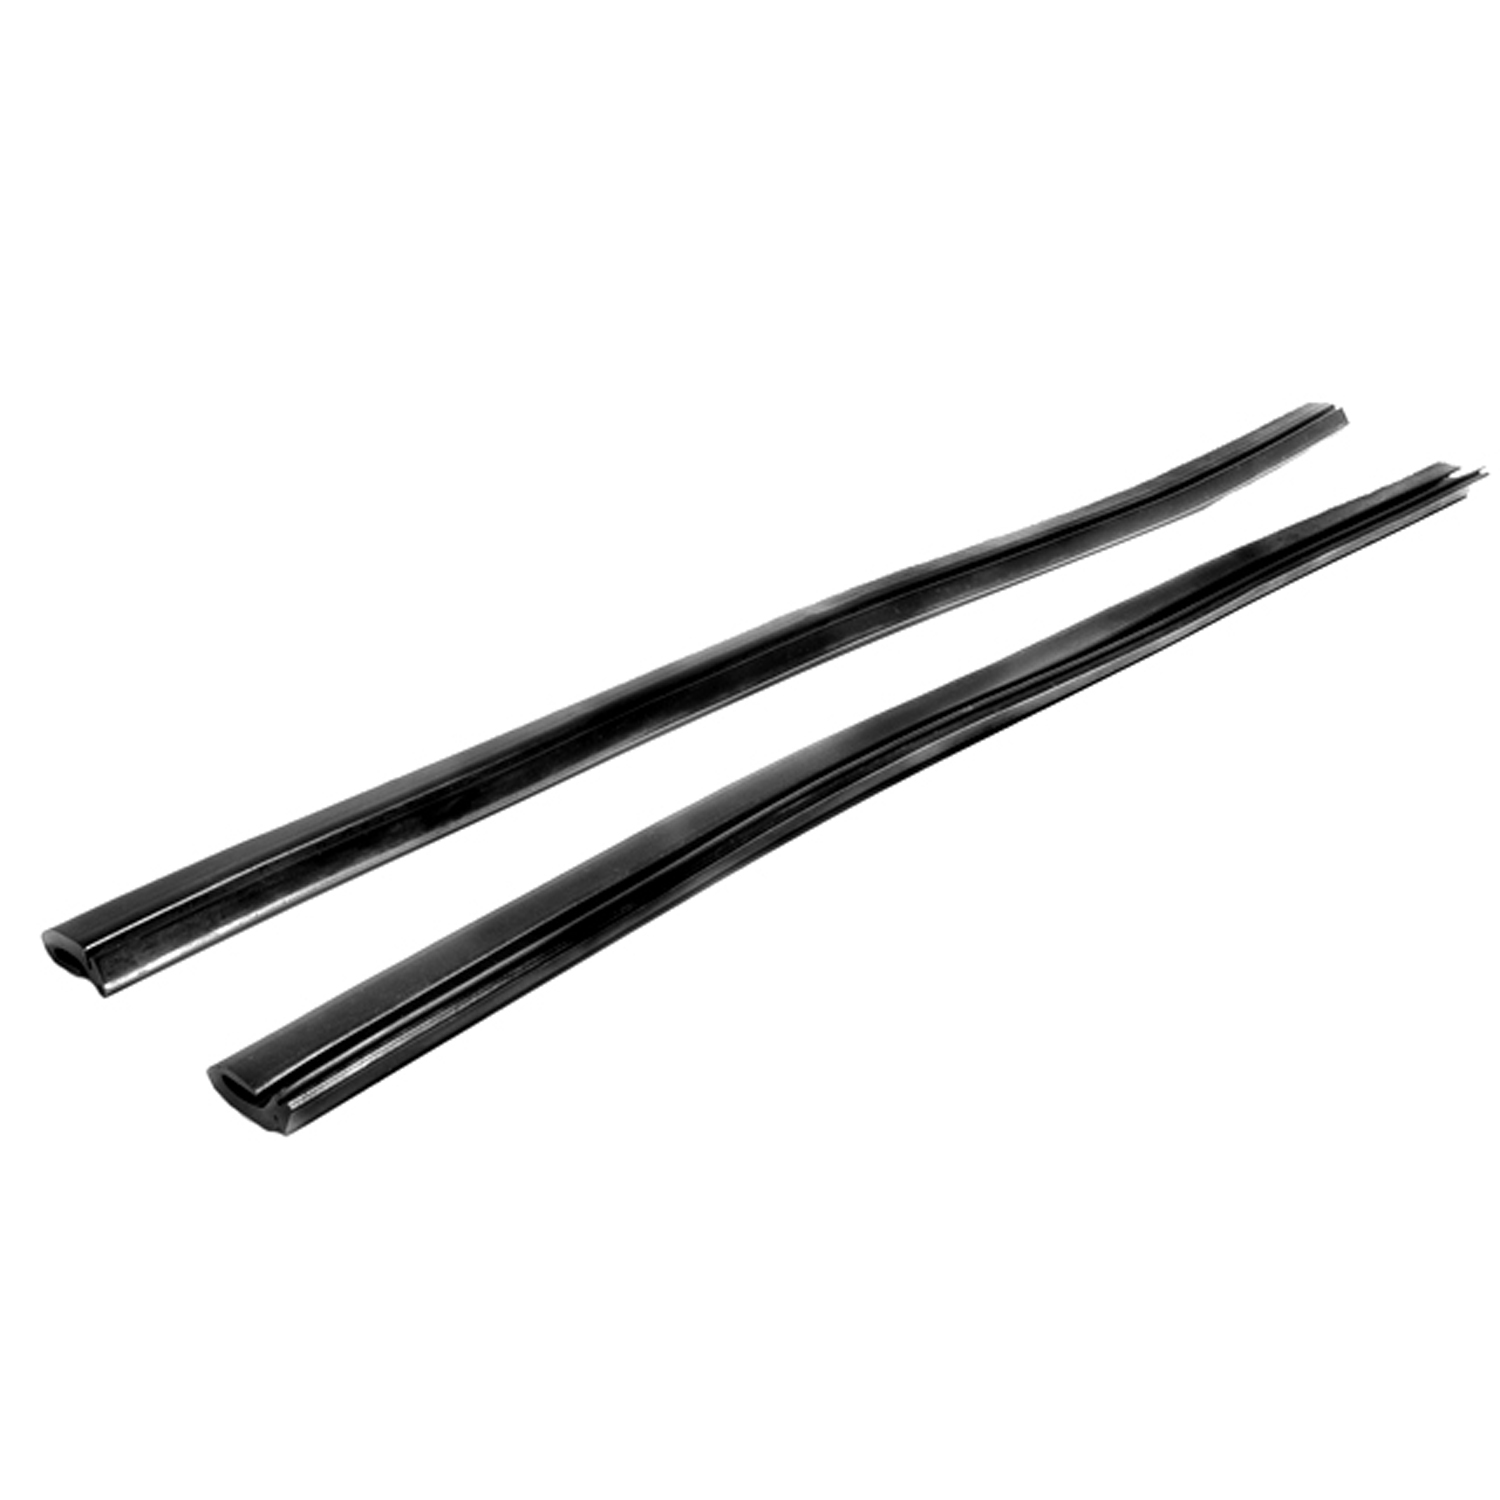 1969 Ford Thunderbird Rear Side Roll-Up Window Seal, for Hardtops and Convertibles-VS 3